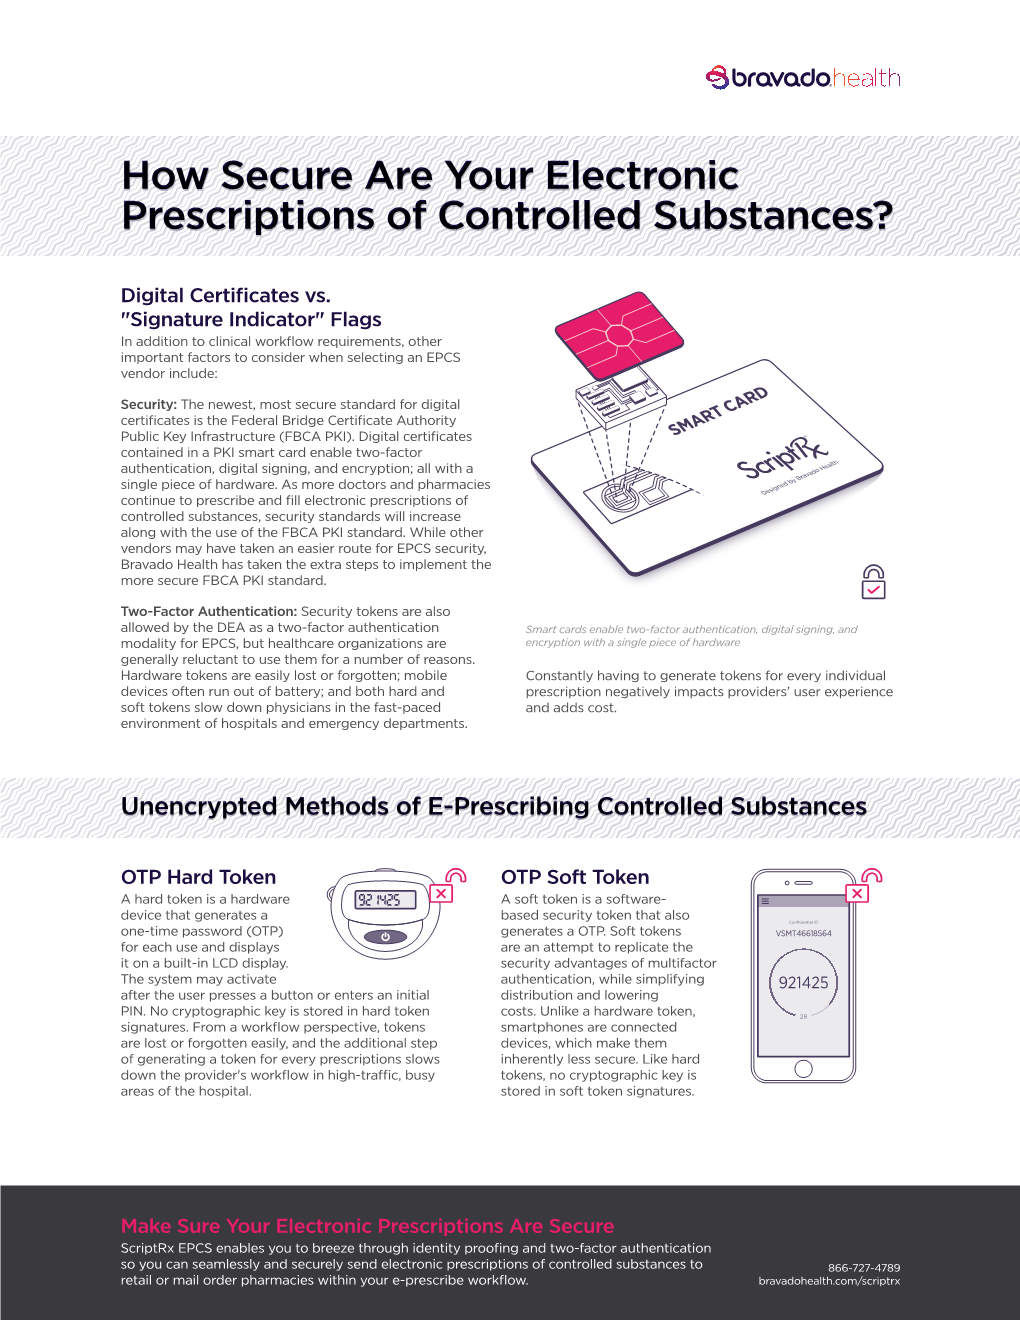 How Secure Are Your Electronic Prescriptions of Controlled Substances?